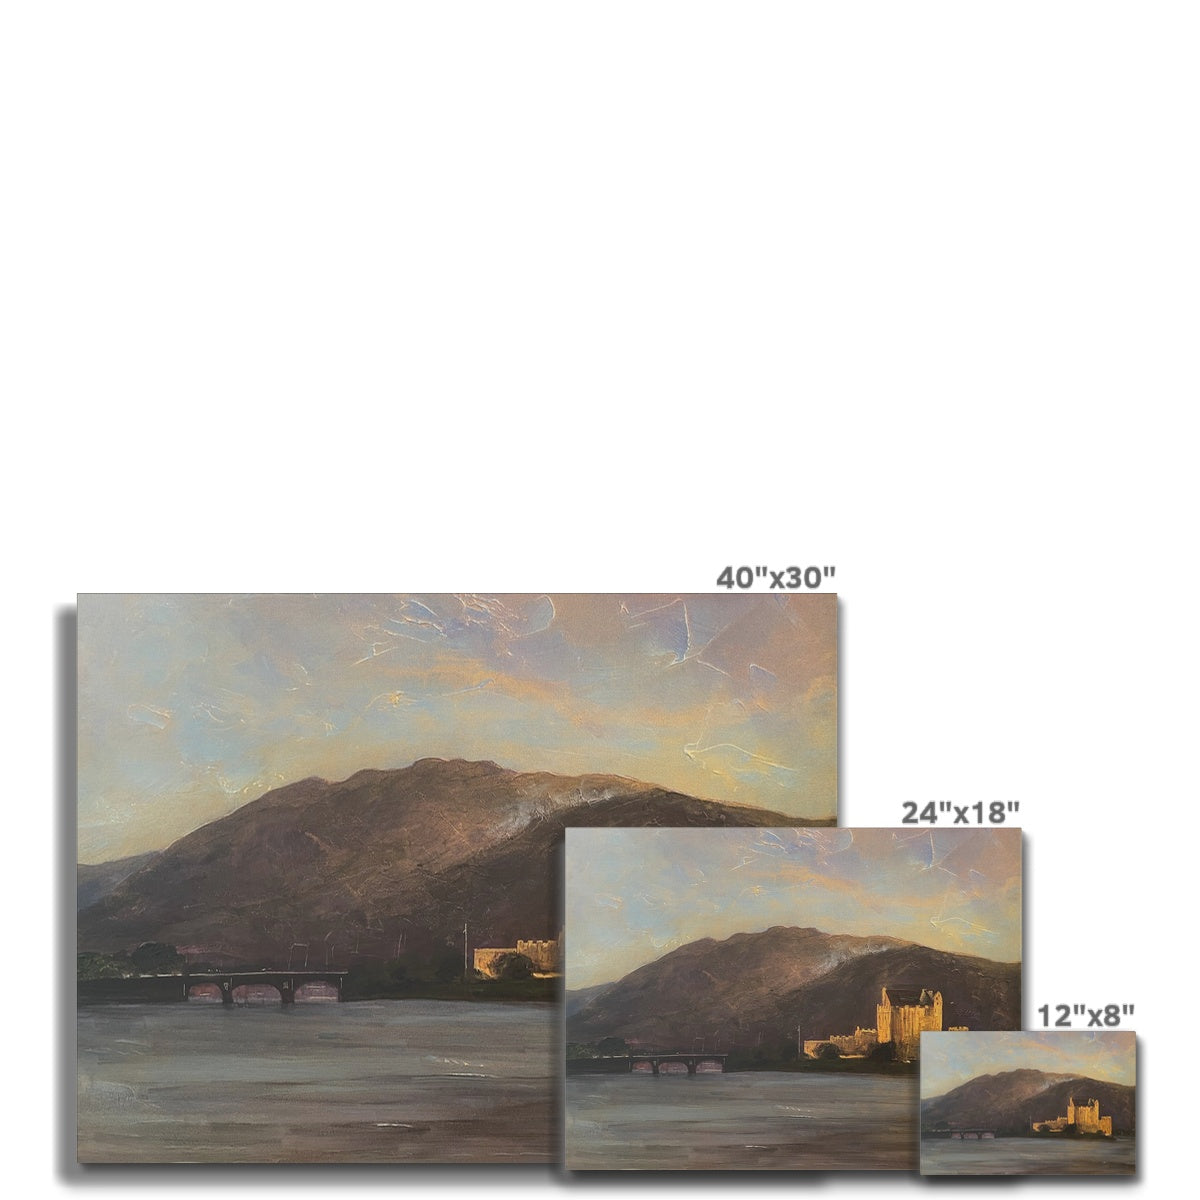 Eilean Donan Castle Painting | Canvas From Scotland-Contemporary Stretched Canvas Prints-Historic & Iconic Scotland Art Gallery-Paintings, Prints, Homeware, Art Gifts From Scotland By Scottish Artist Kevin Hunter